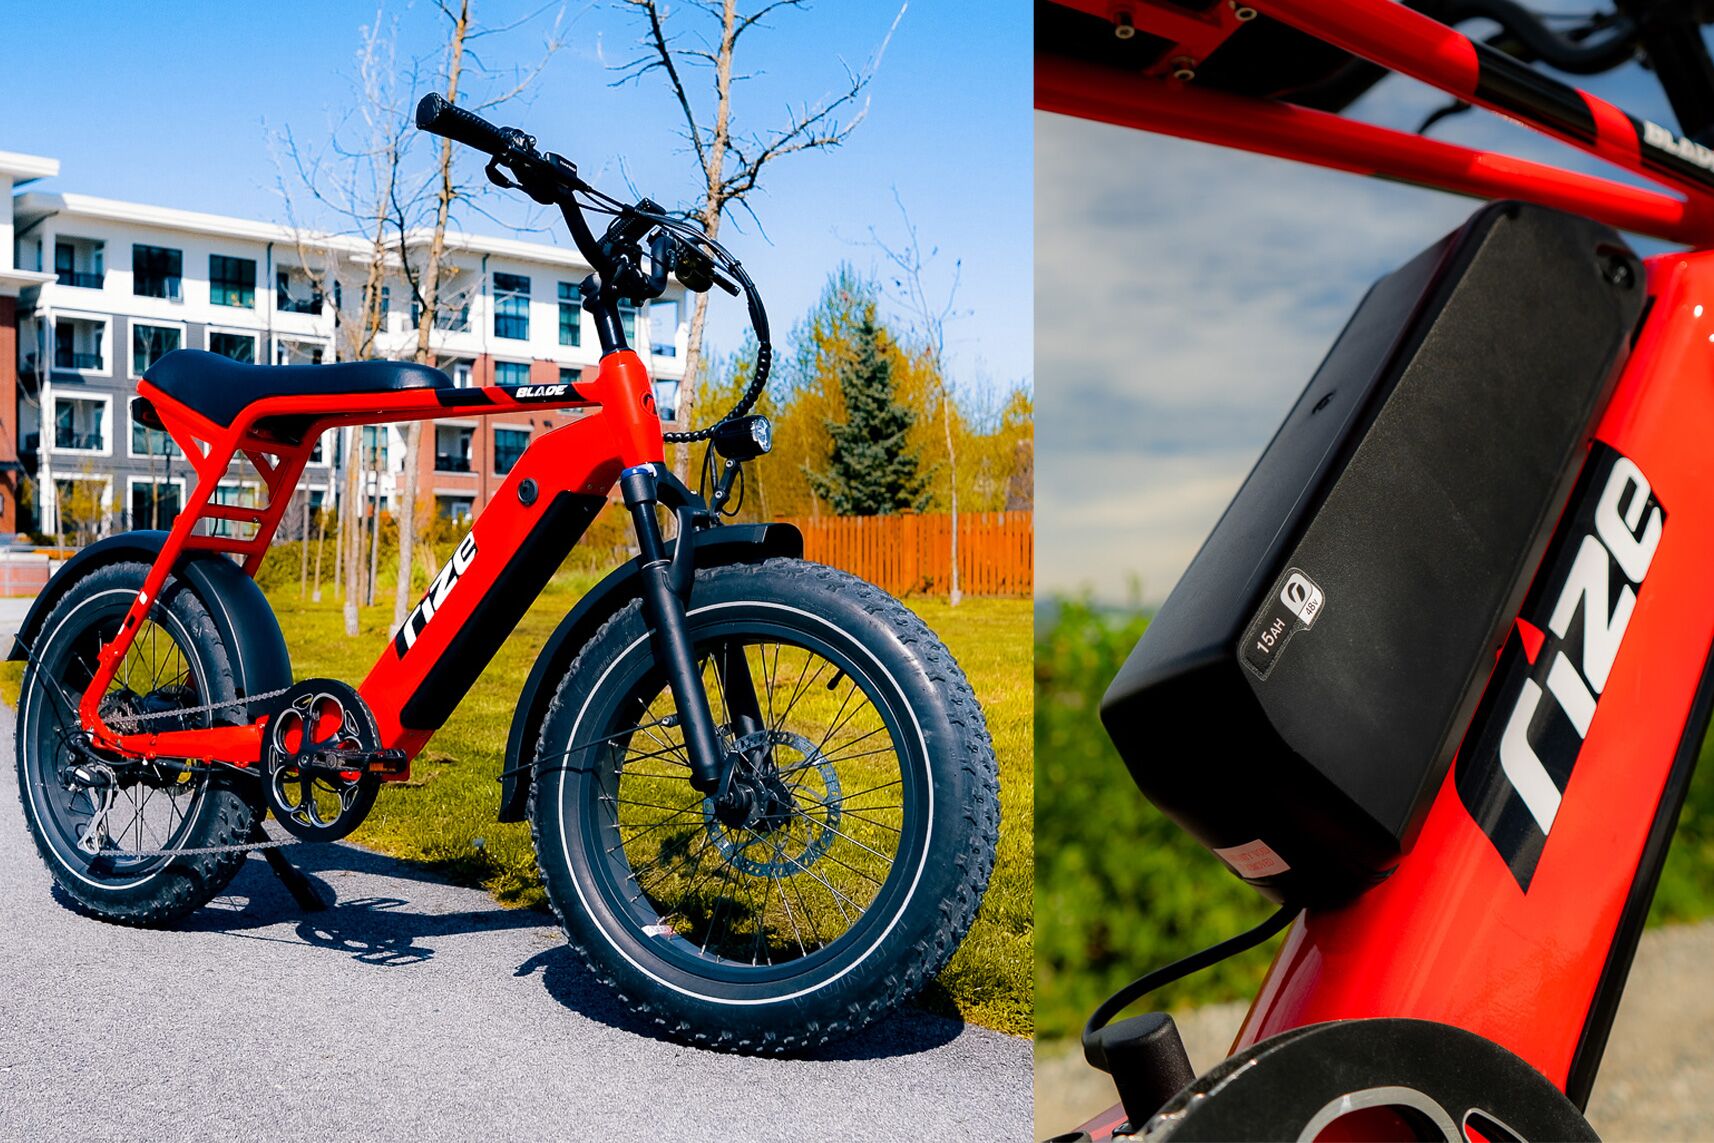 Large Single Battery vs. Dual Battery System: Which is Better for Your E-Bike?